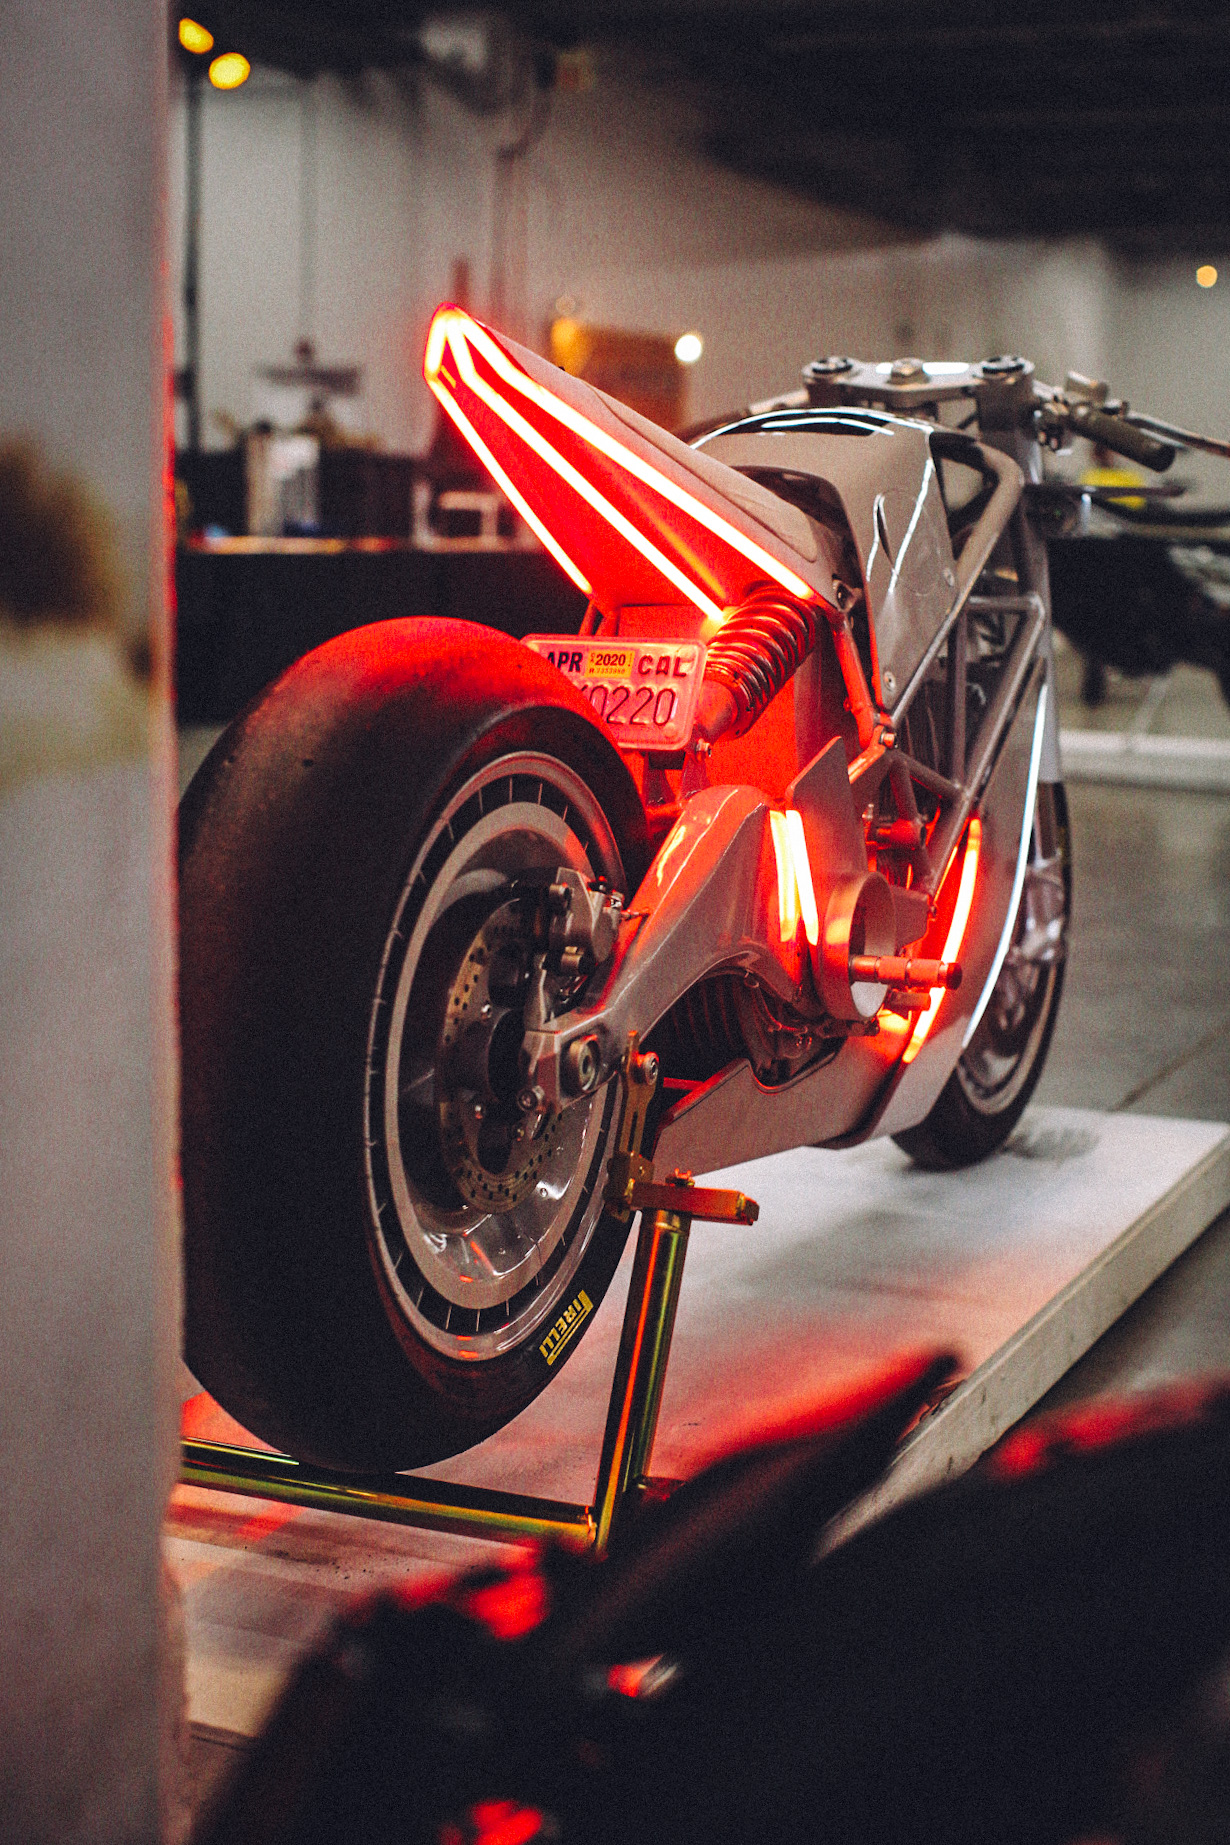 Futuristic tail on Hugo Eccles Zero XP at The One Motorcycle Show